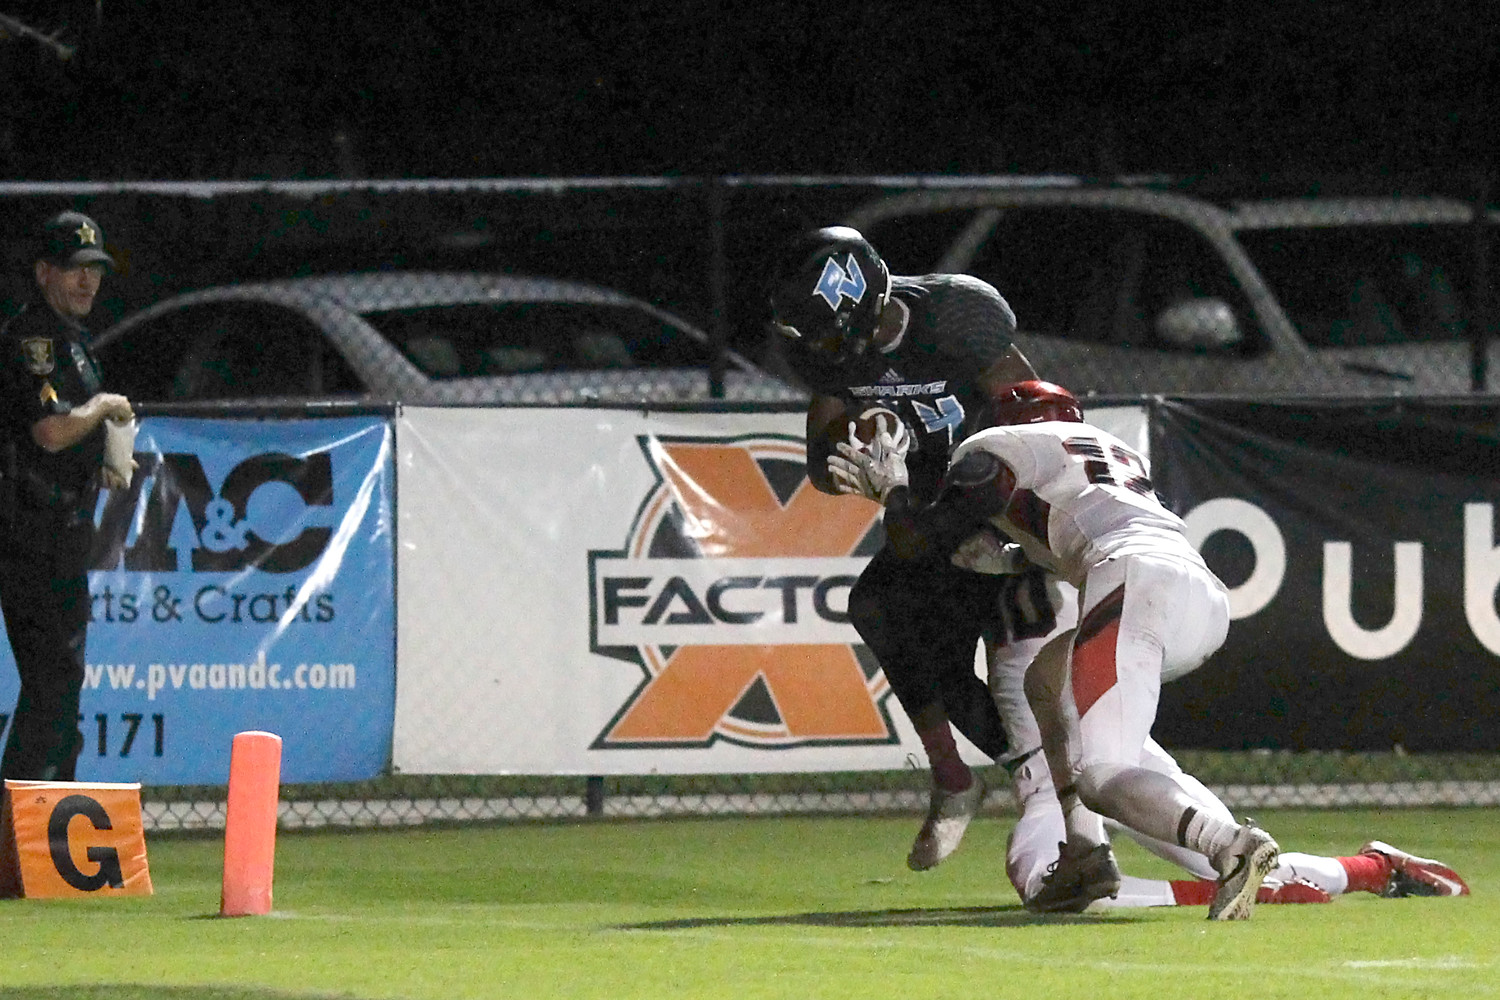 Christian Herring bulls his way into the end zone for a Shark TD.